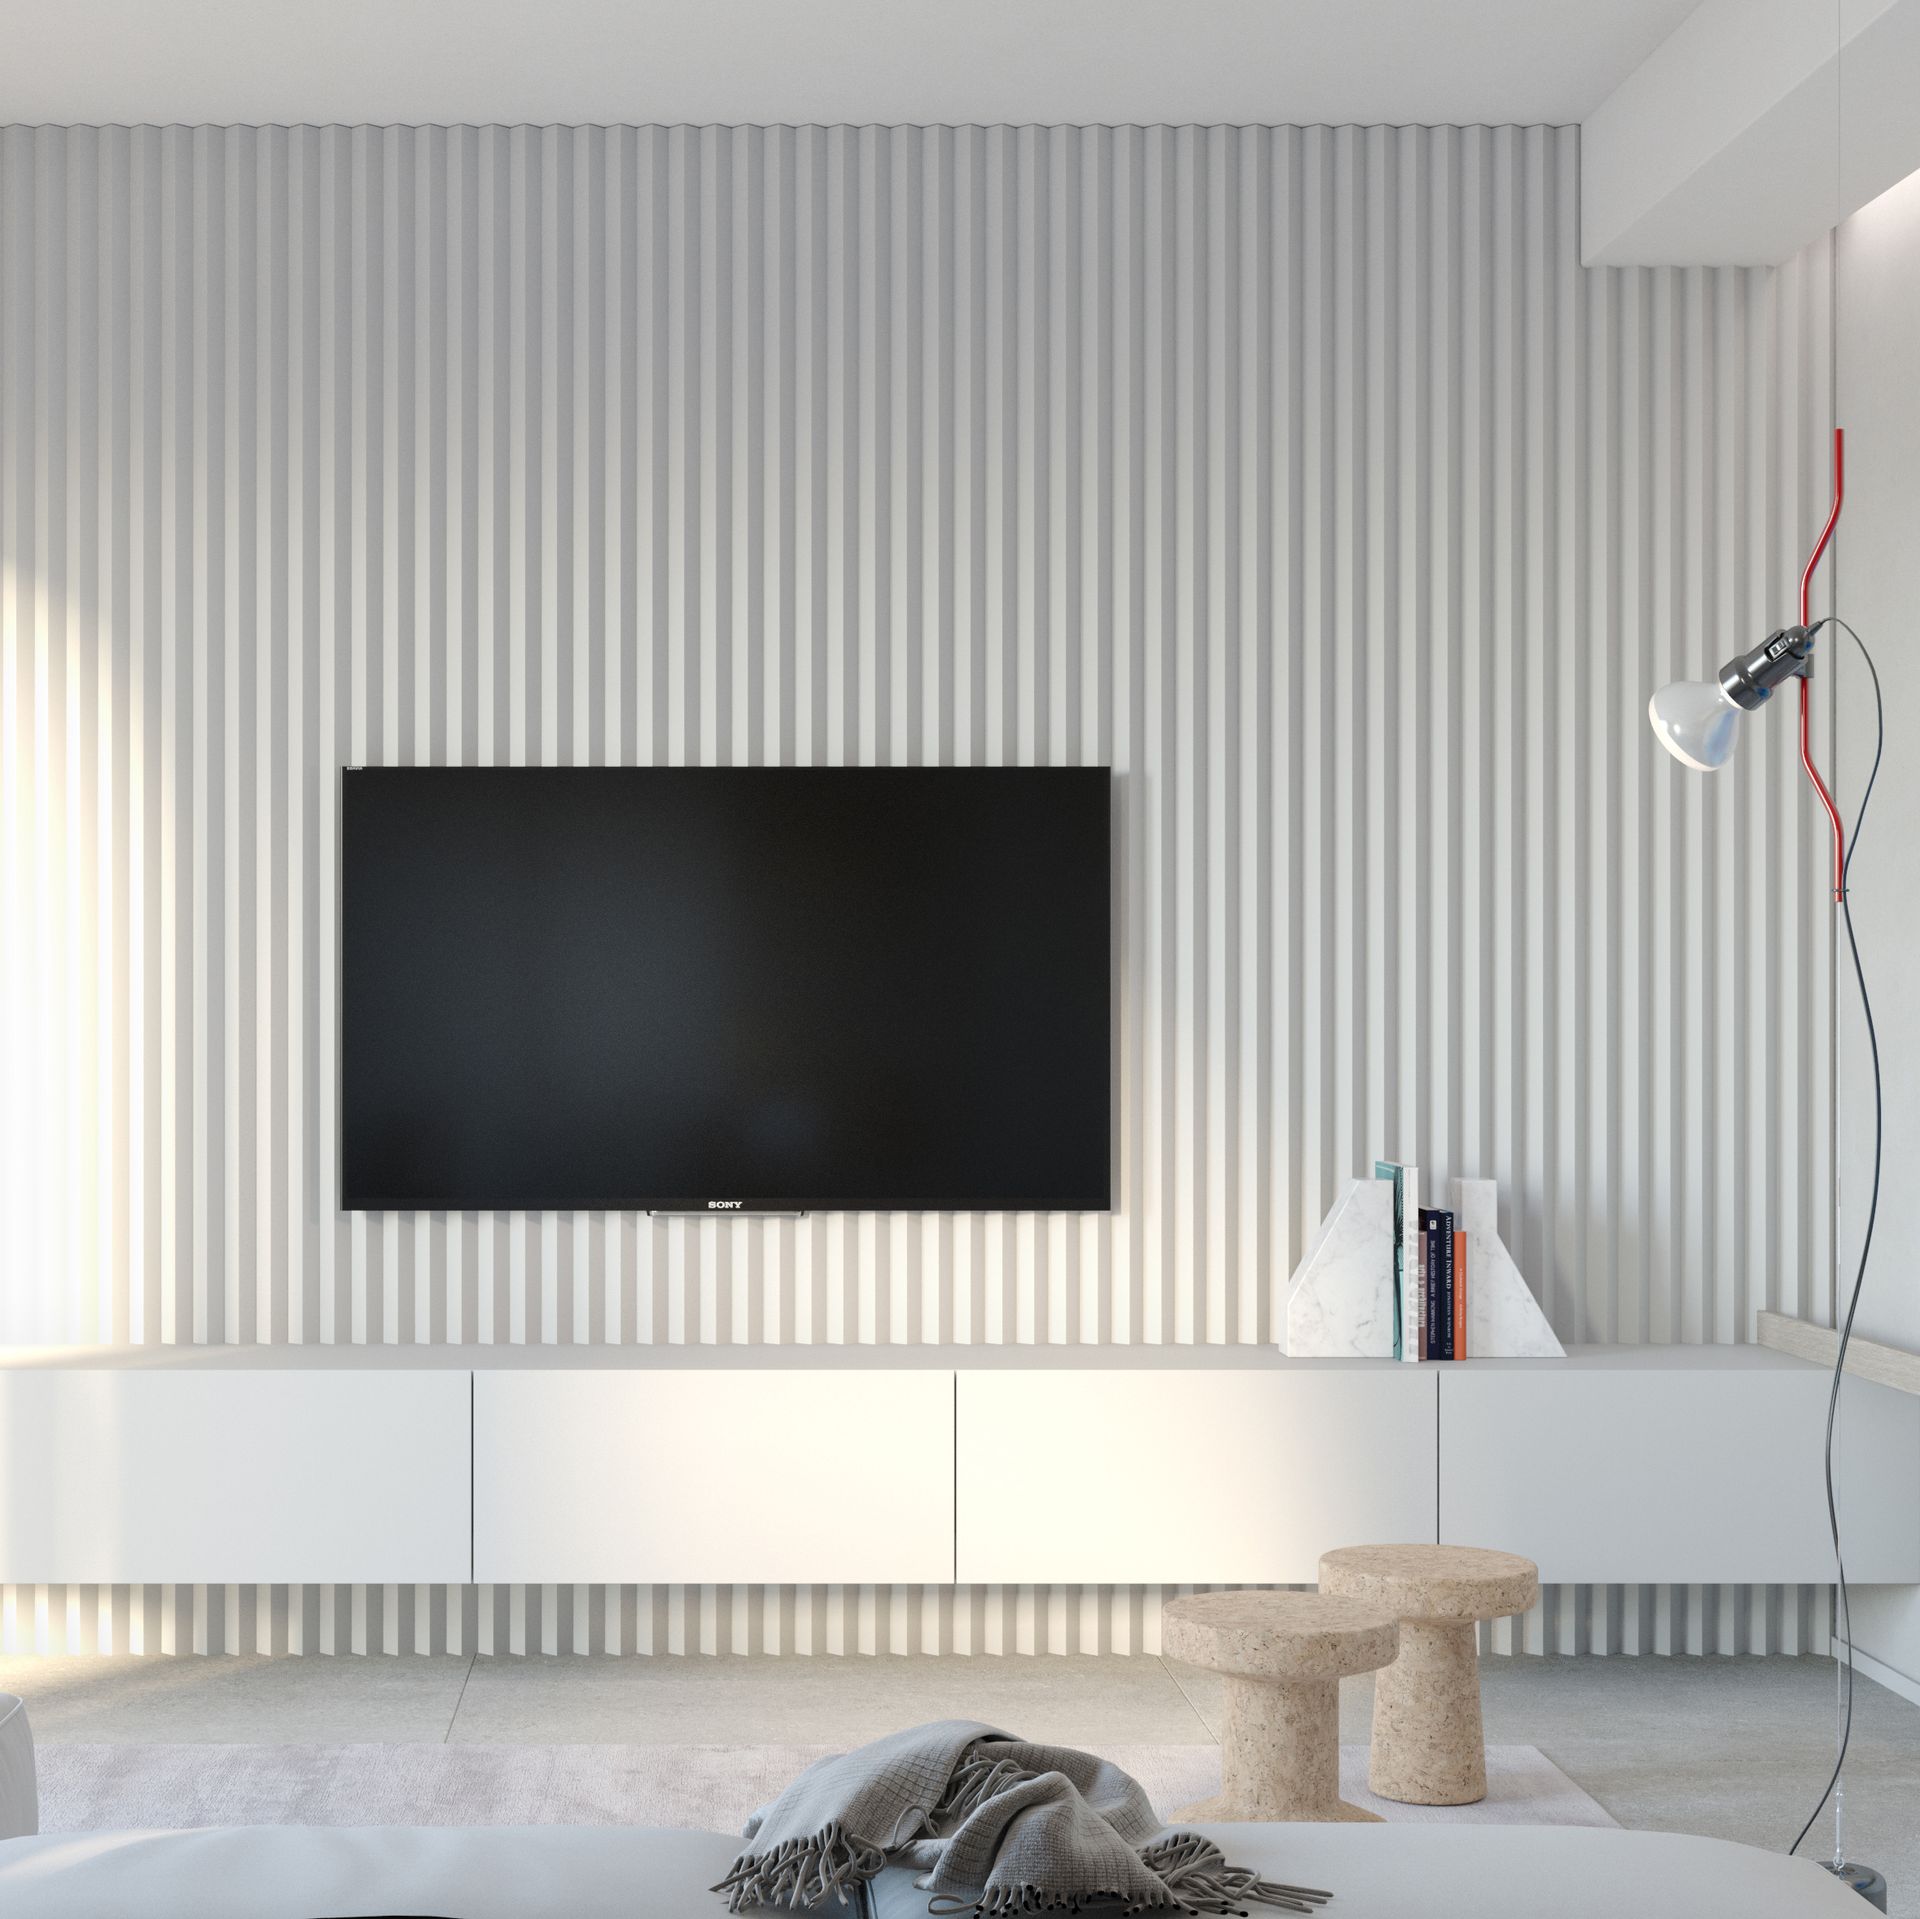 Interior design project, apartment renovation, study of spaces and surfaces, island kitchen with wood paneling. Officina Magisafi architecture design - tv wall rendering